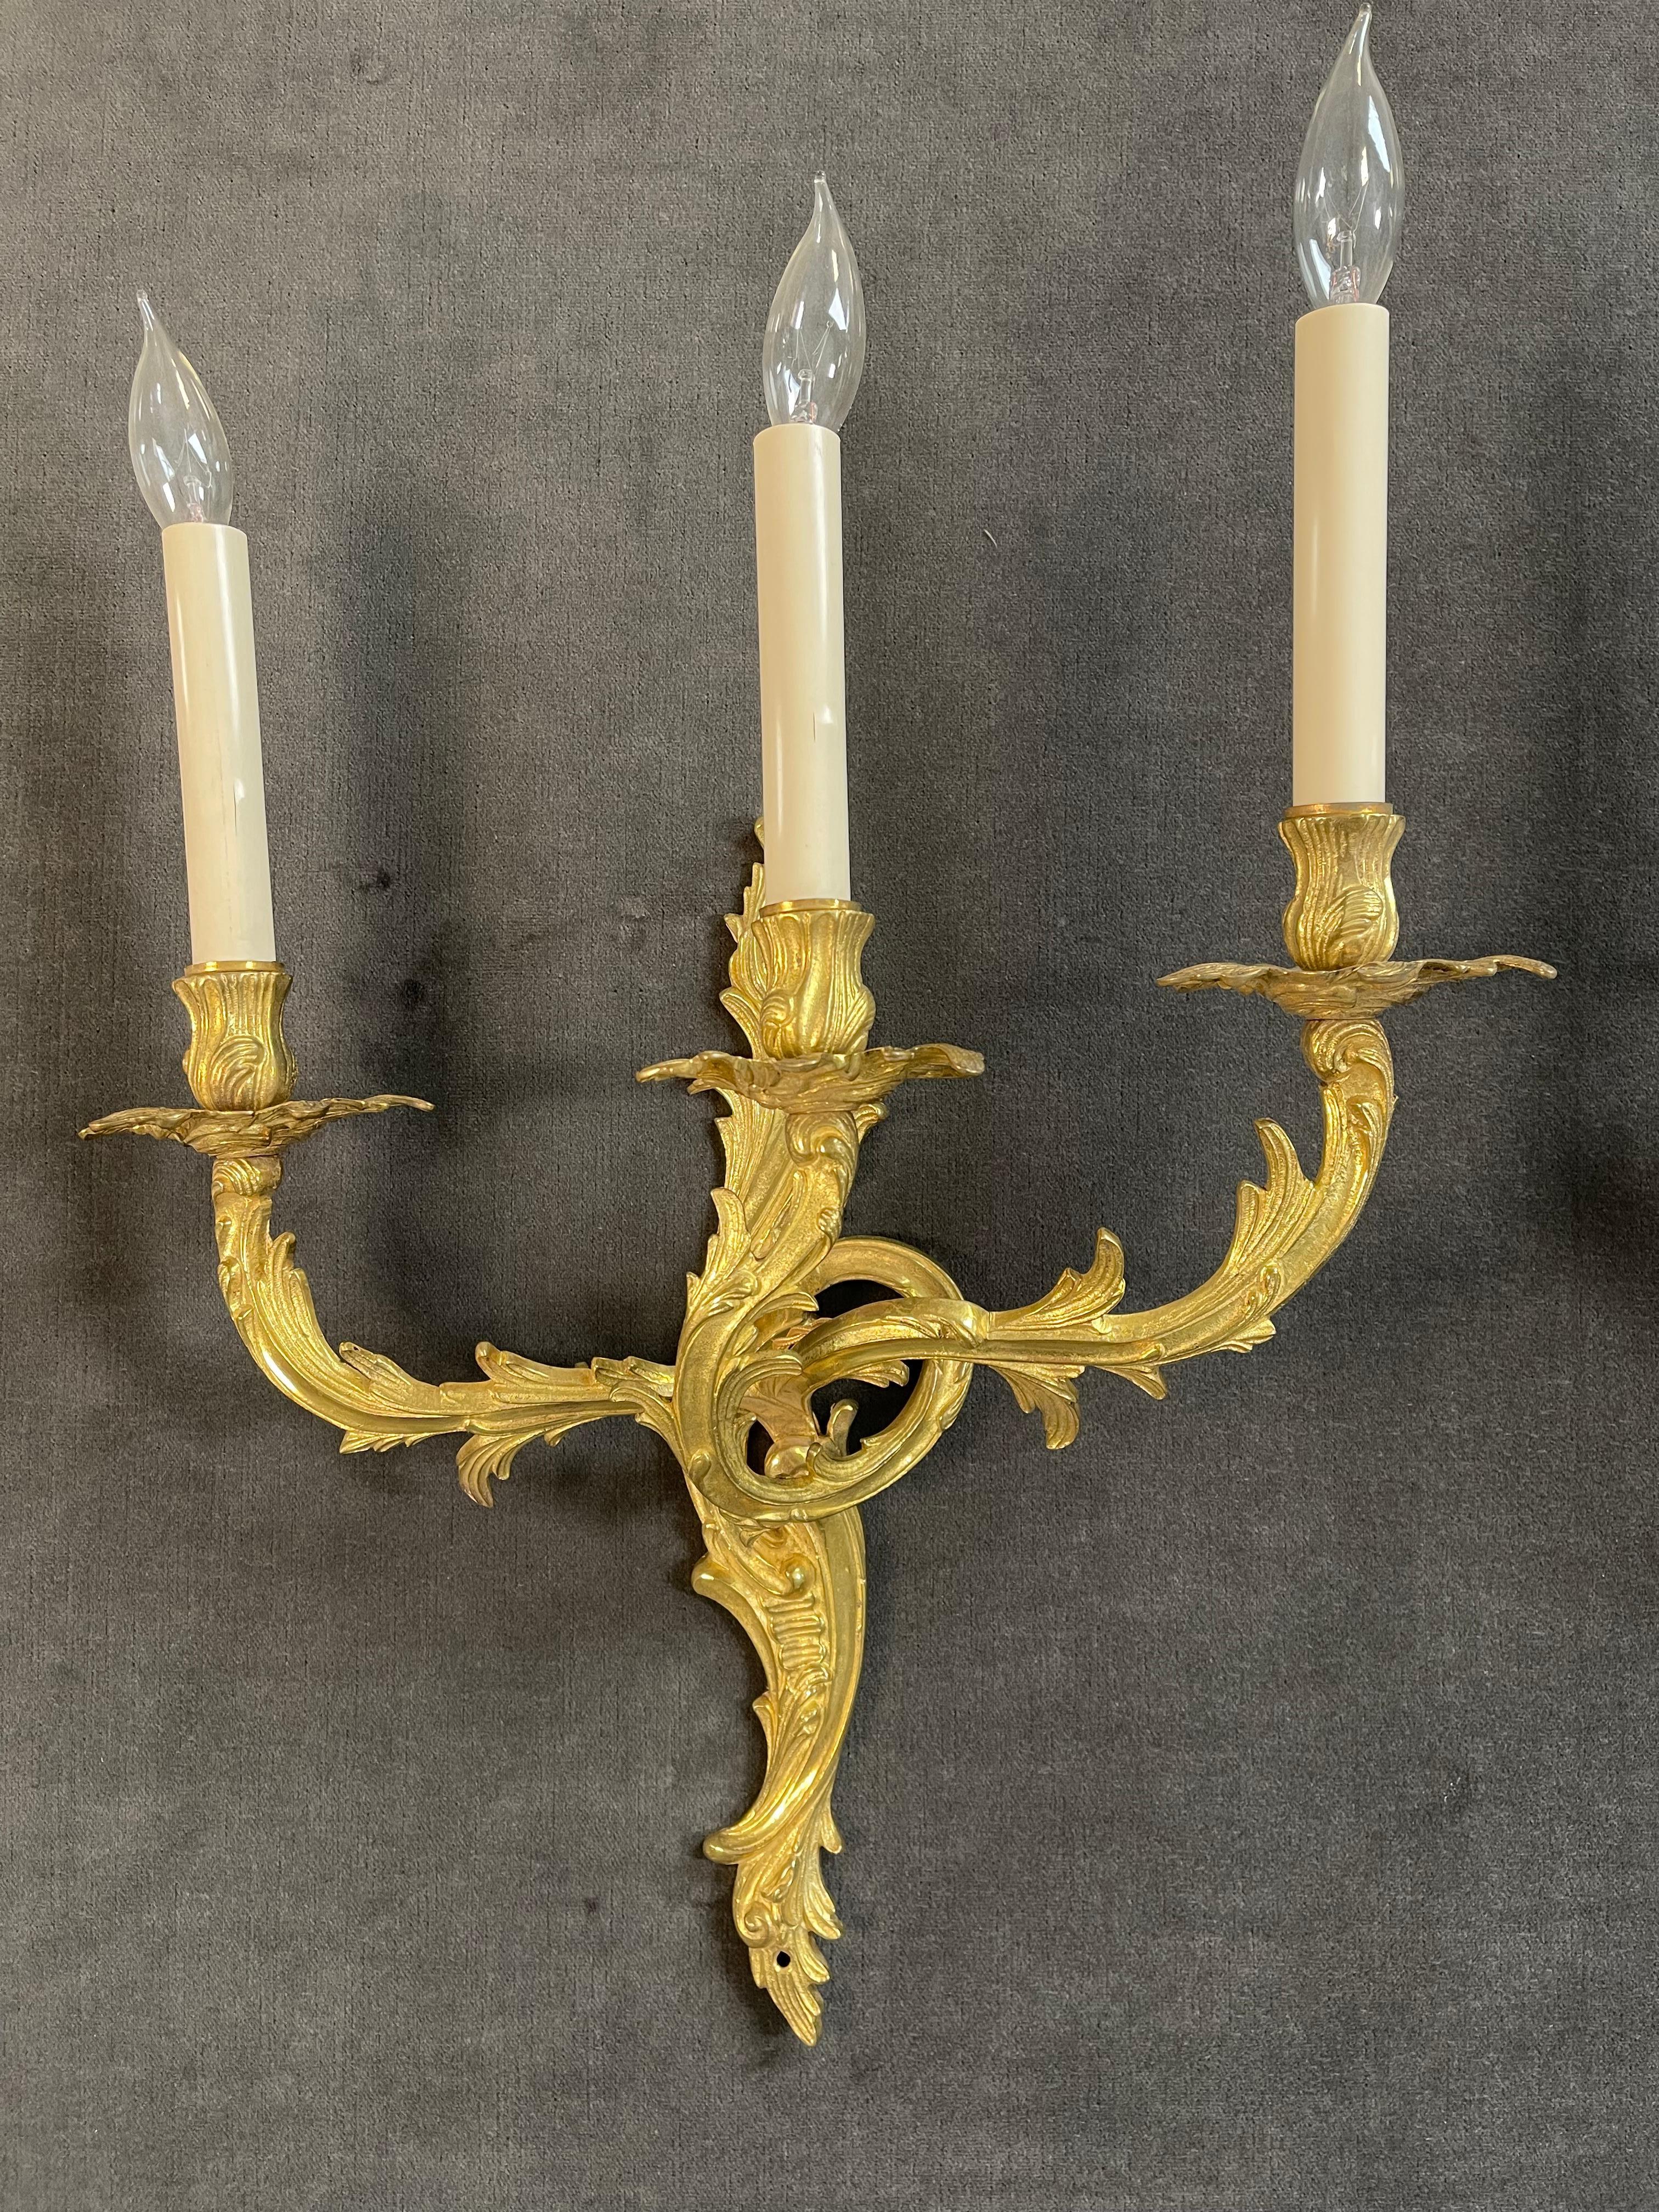 Pair of Louis XV Style Gilt-Bronze Wall Sconces For Sale 8